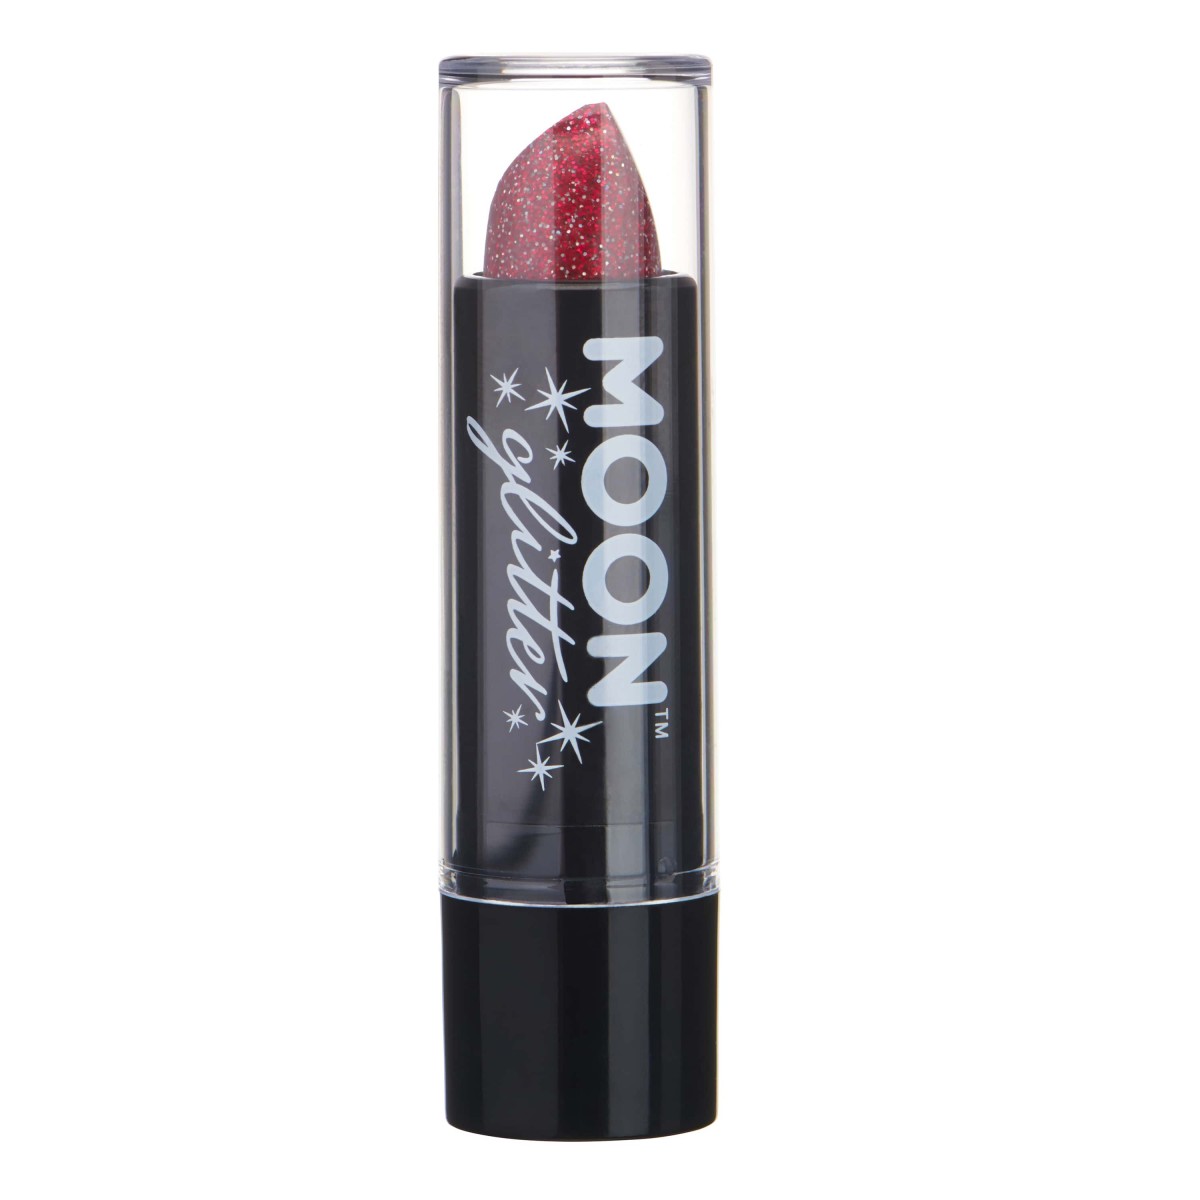 MOON CREATIONS G15 HOLOGRAPHIC GLITTER LIPSTICK RED 4.2g